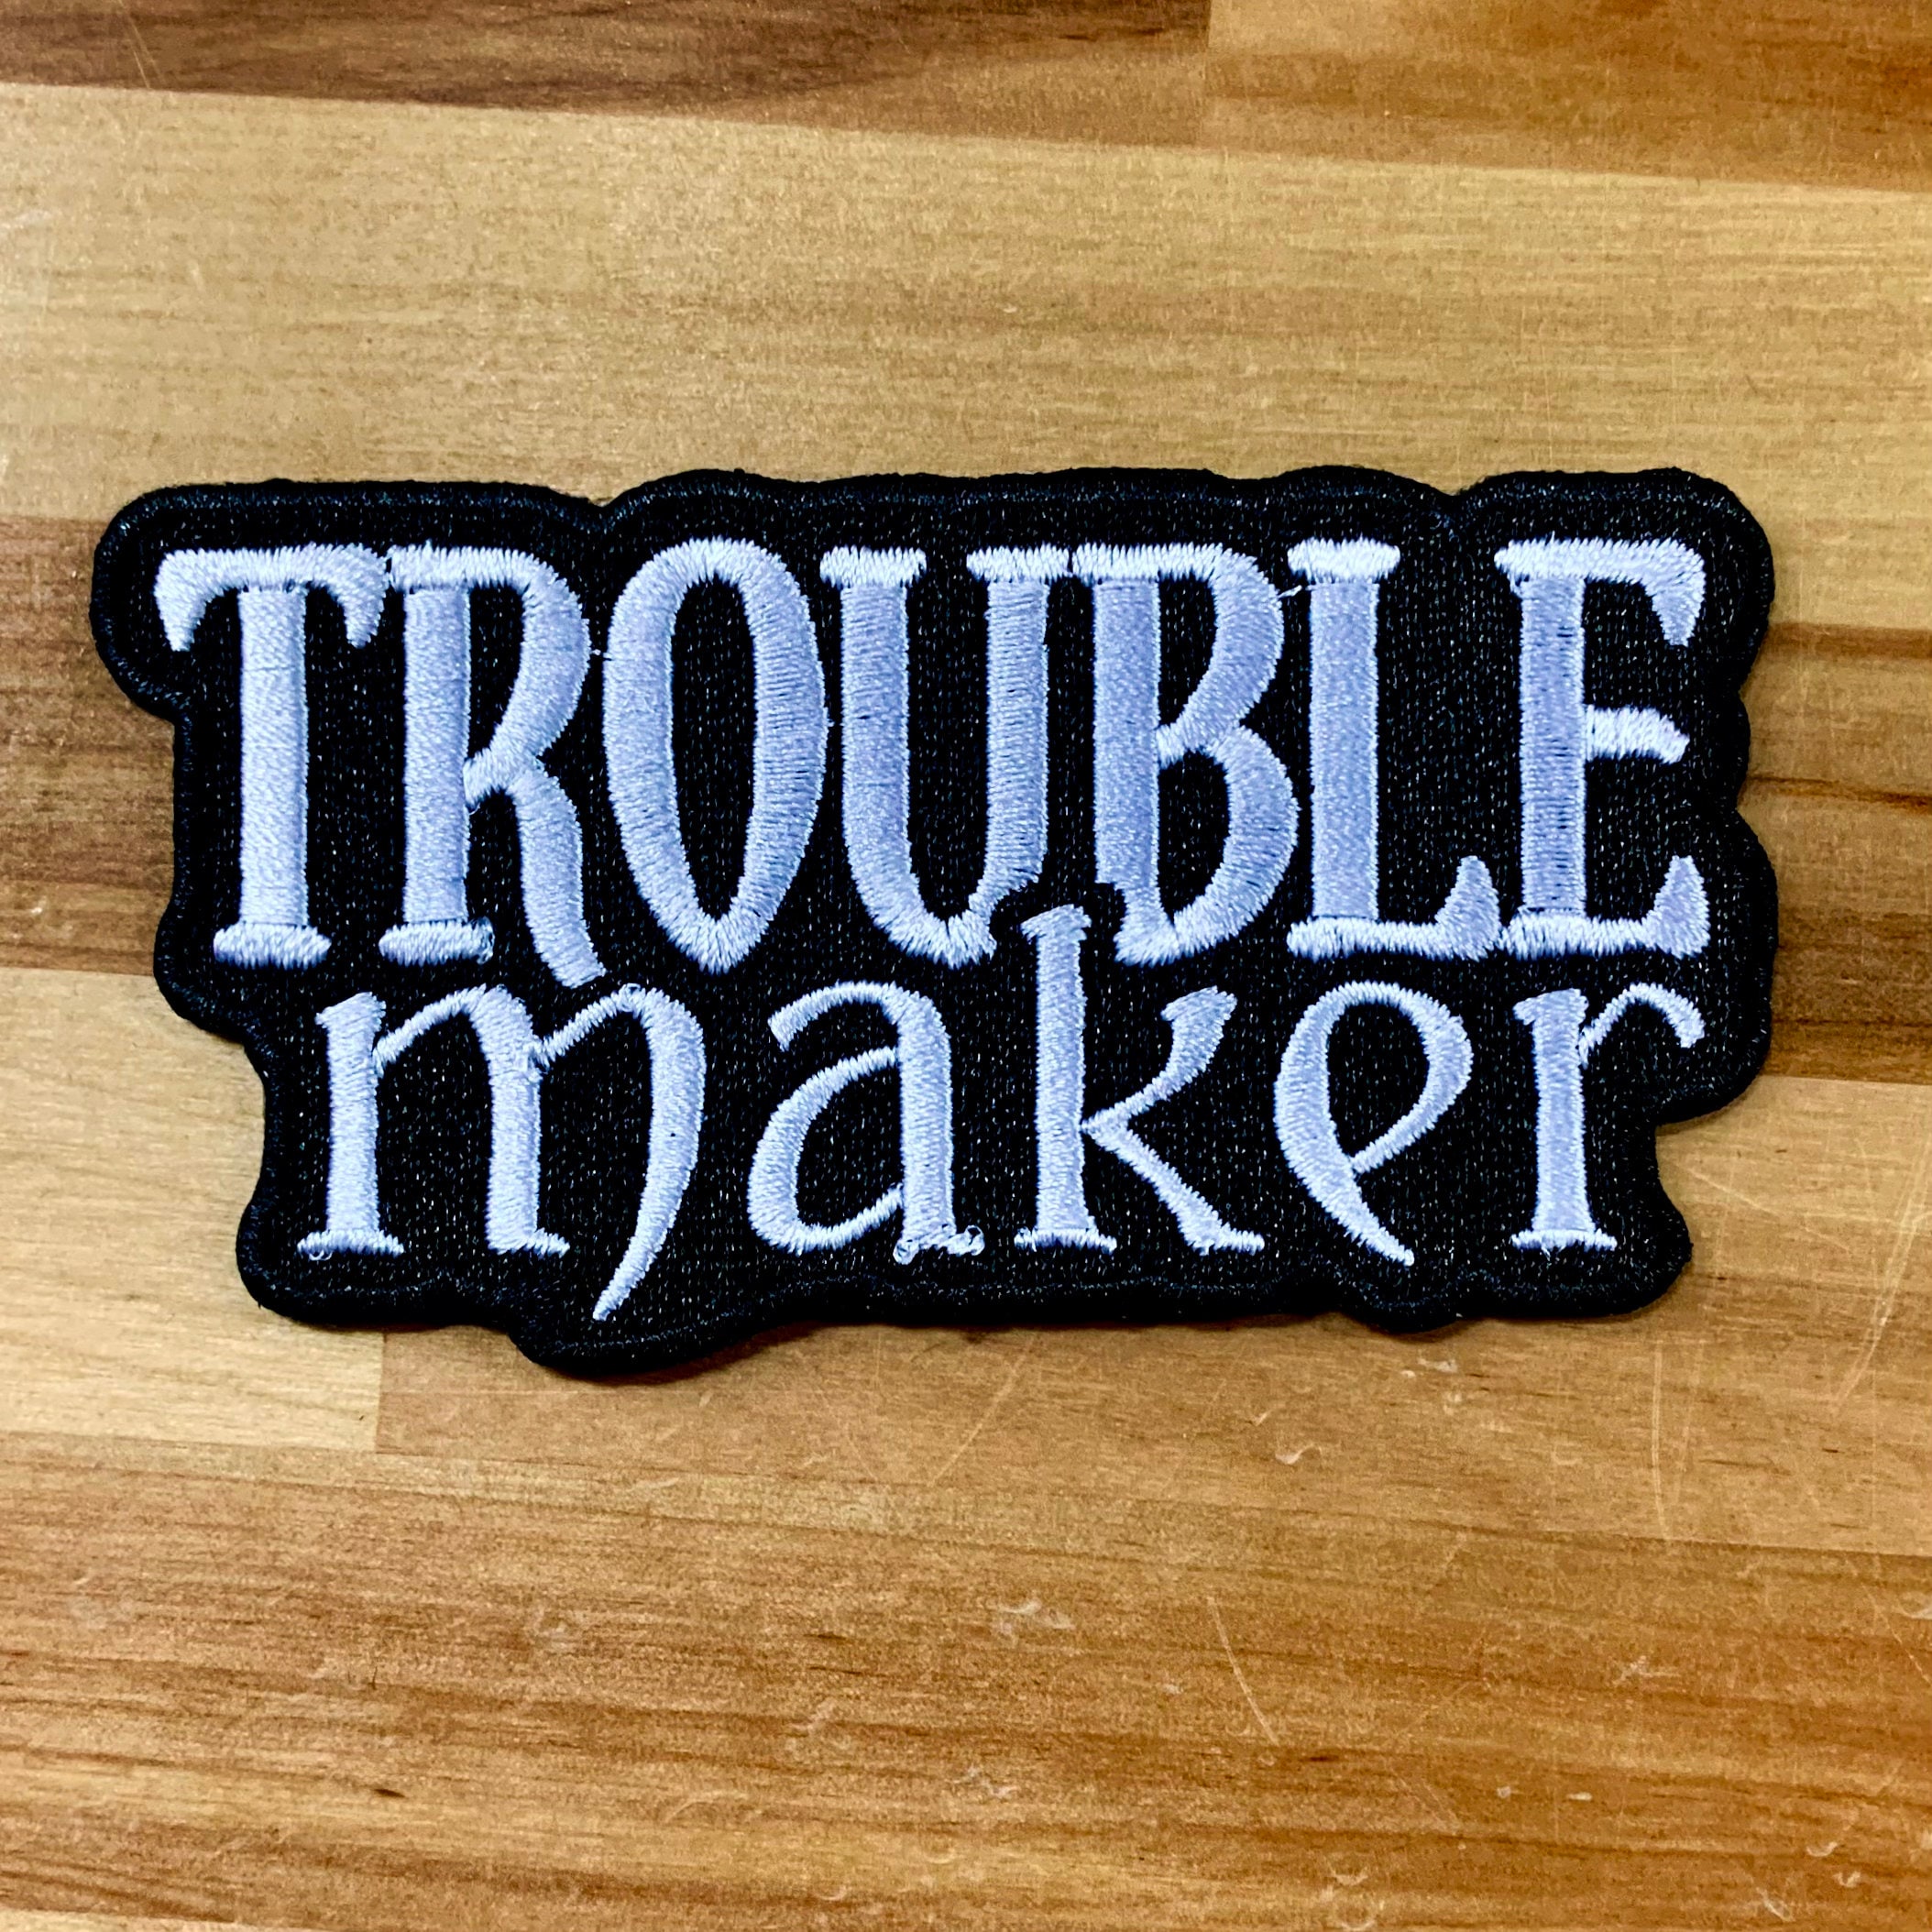 Trouble Maker Patch  Embroidered Patches by Ivamis Patches